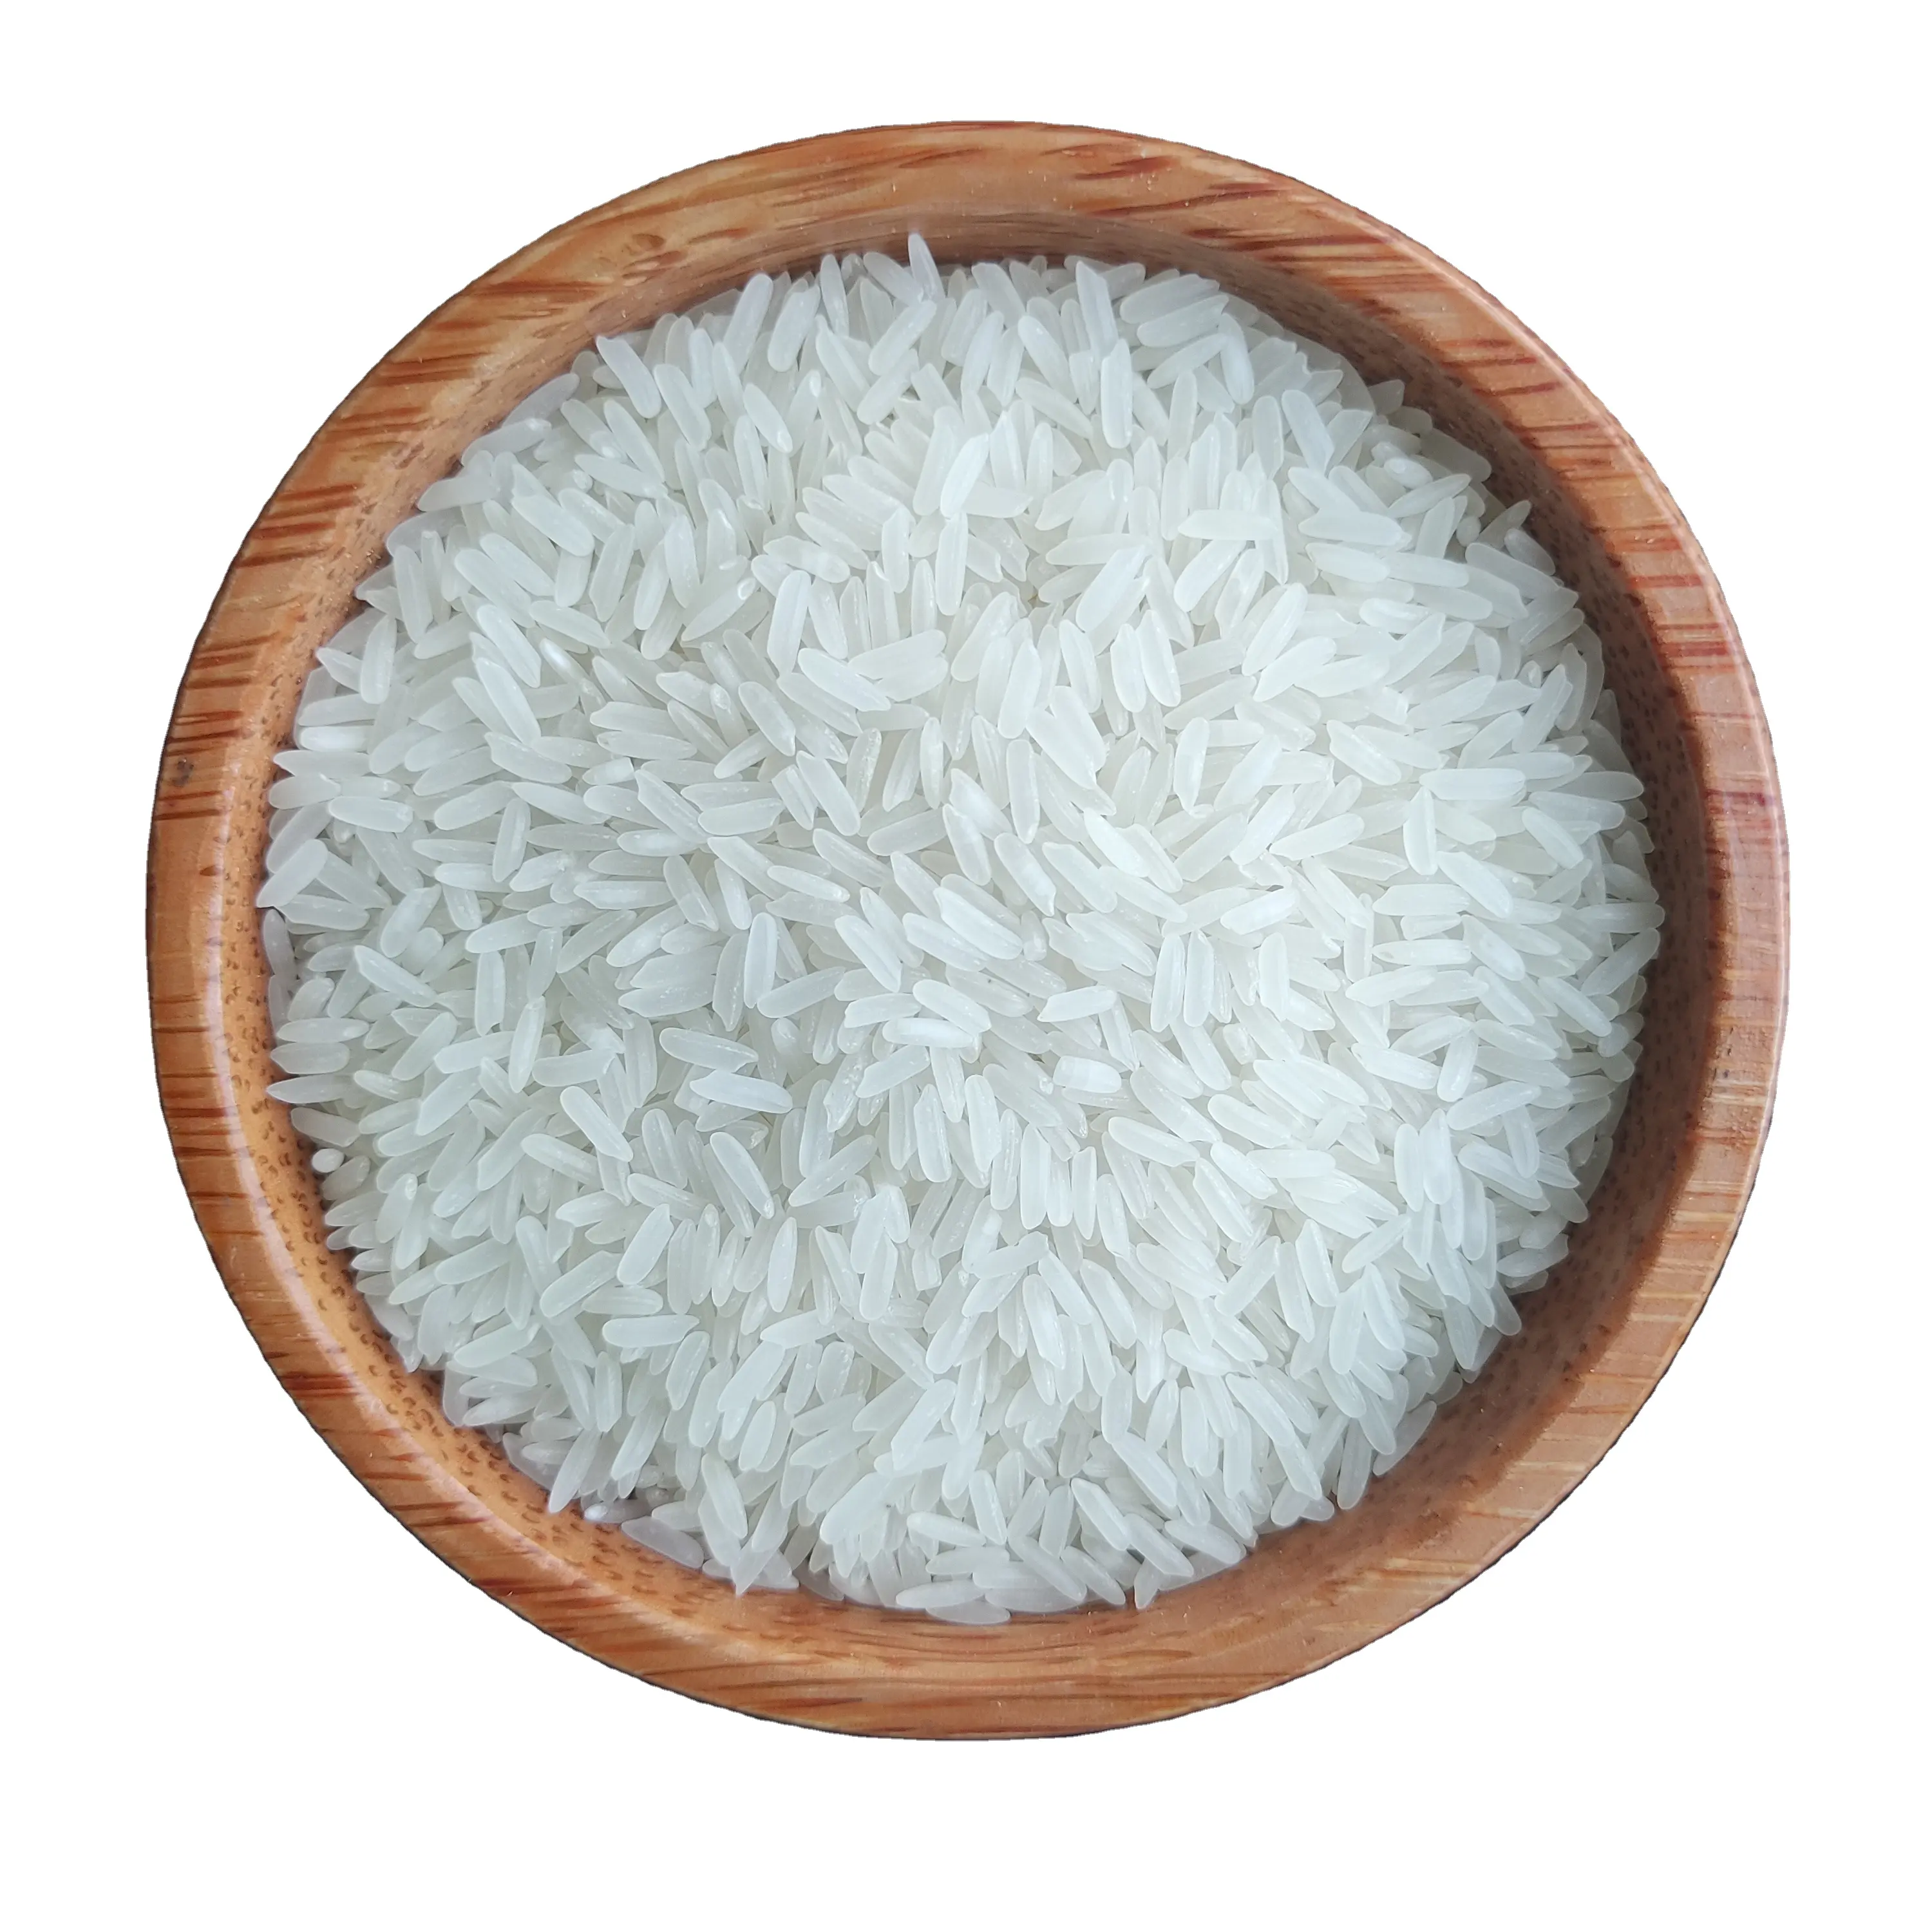 VIETNAMESE RICE JASMINE SUPER SCENTED FOR GLOGAL MARKET WHOLESALE PRICE FROM FACTORY (WA: 84 858080598)